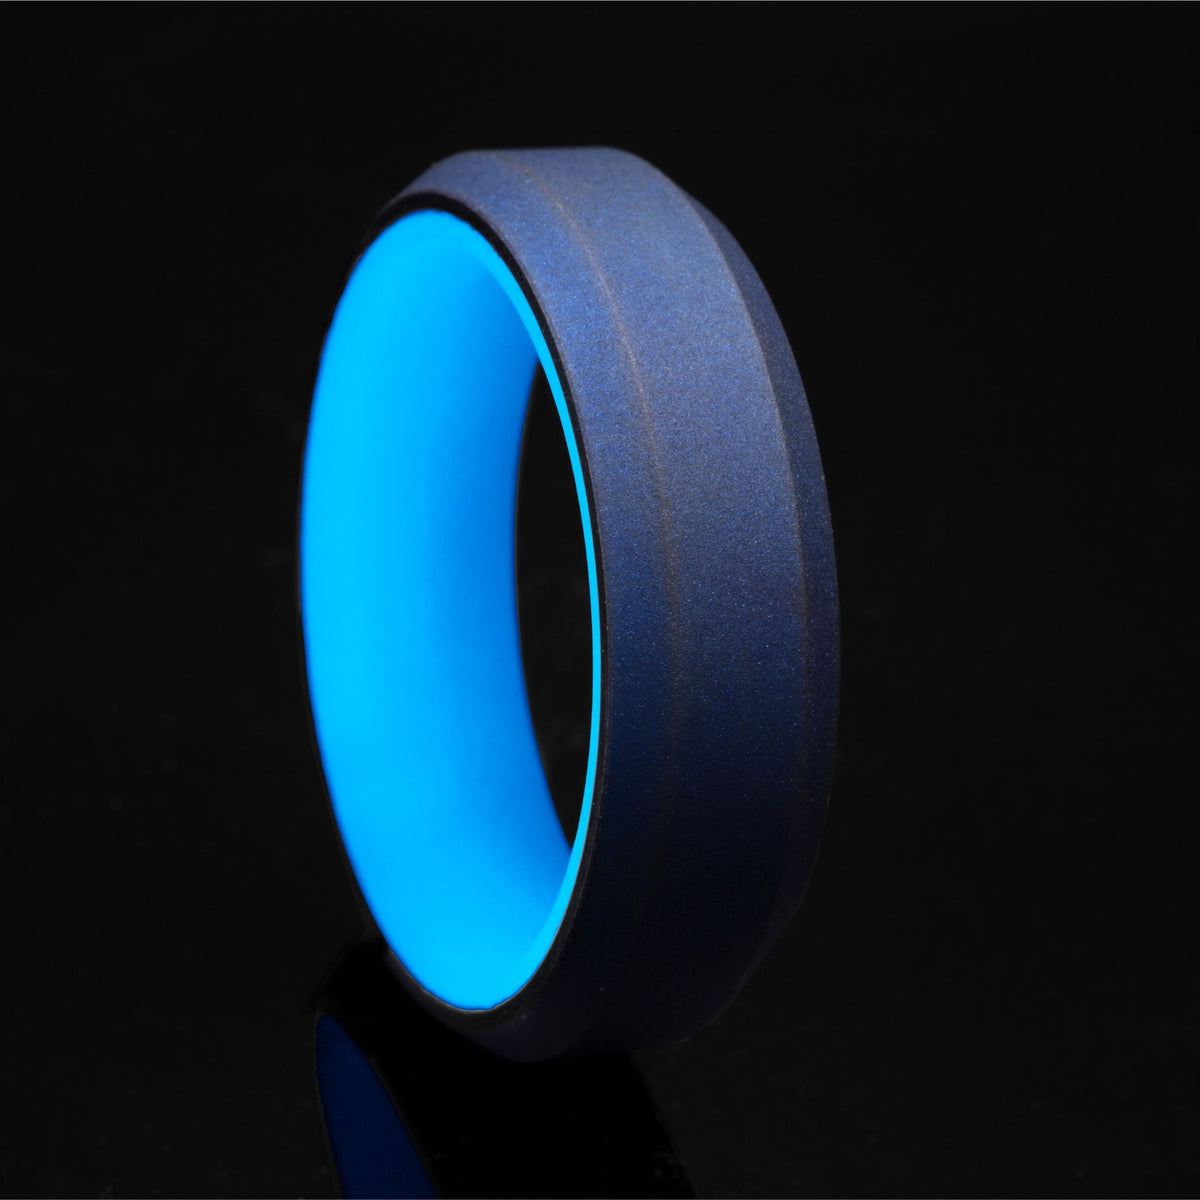 Blue glow ring with blue anodized titanium exterior and beveled edges.